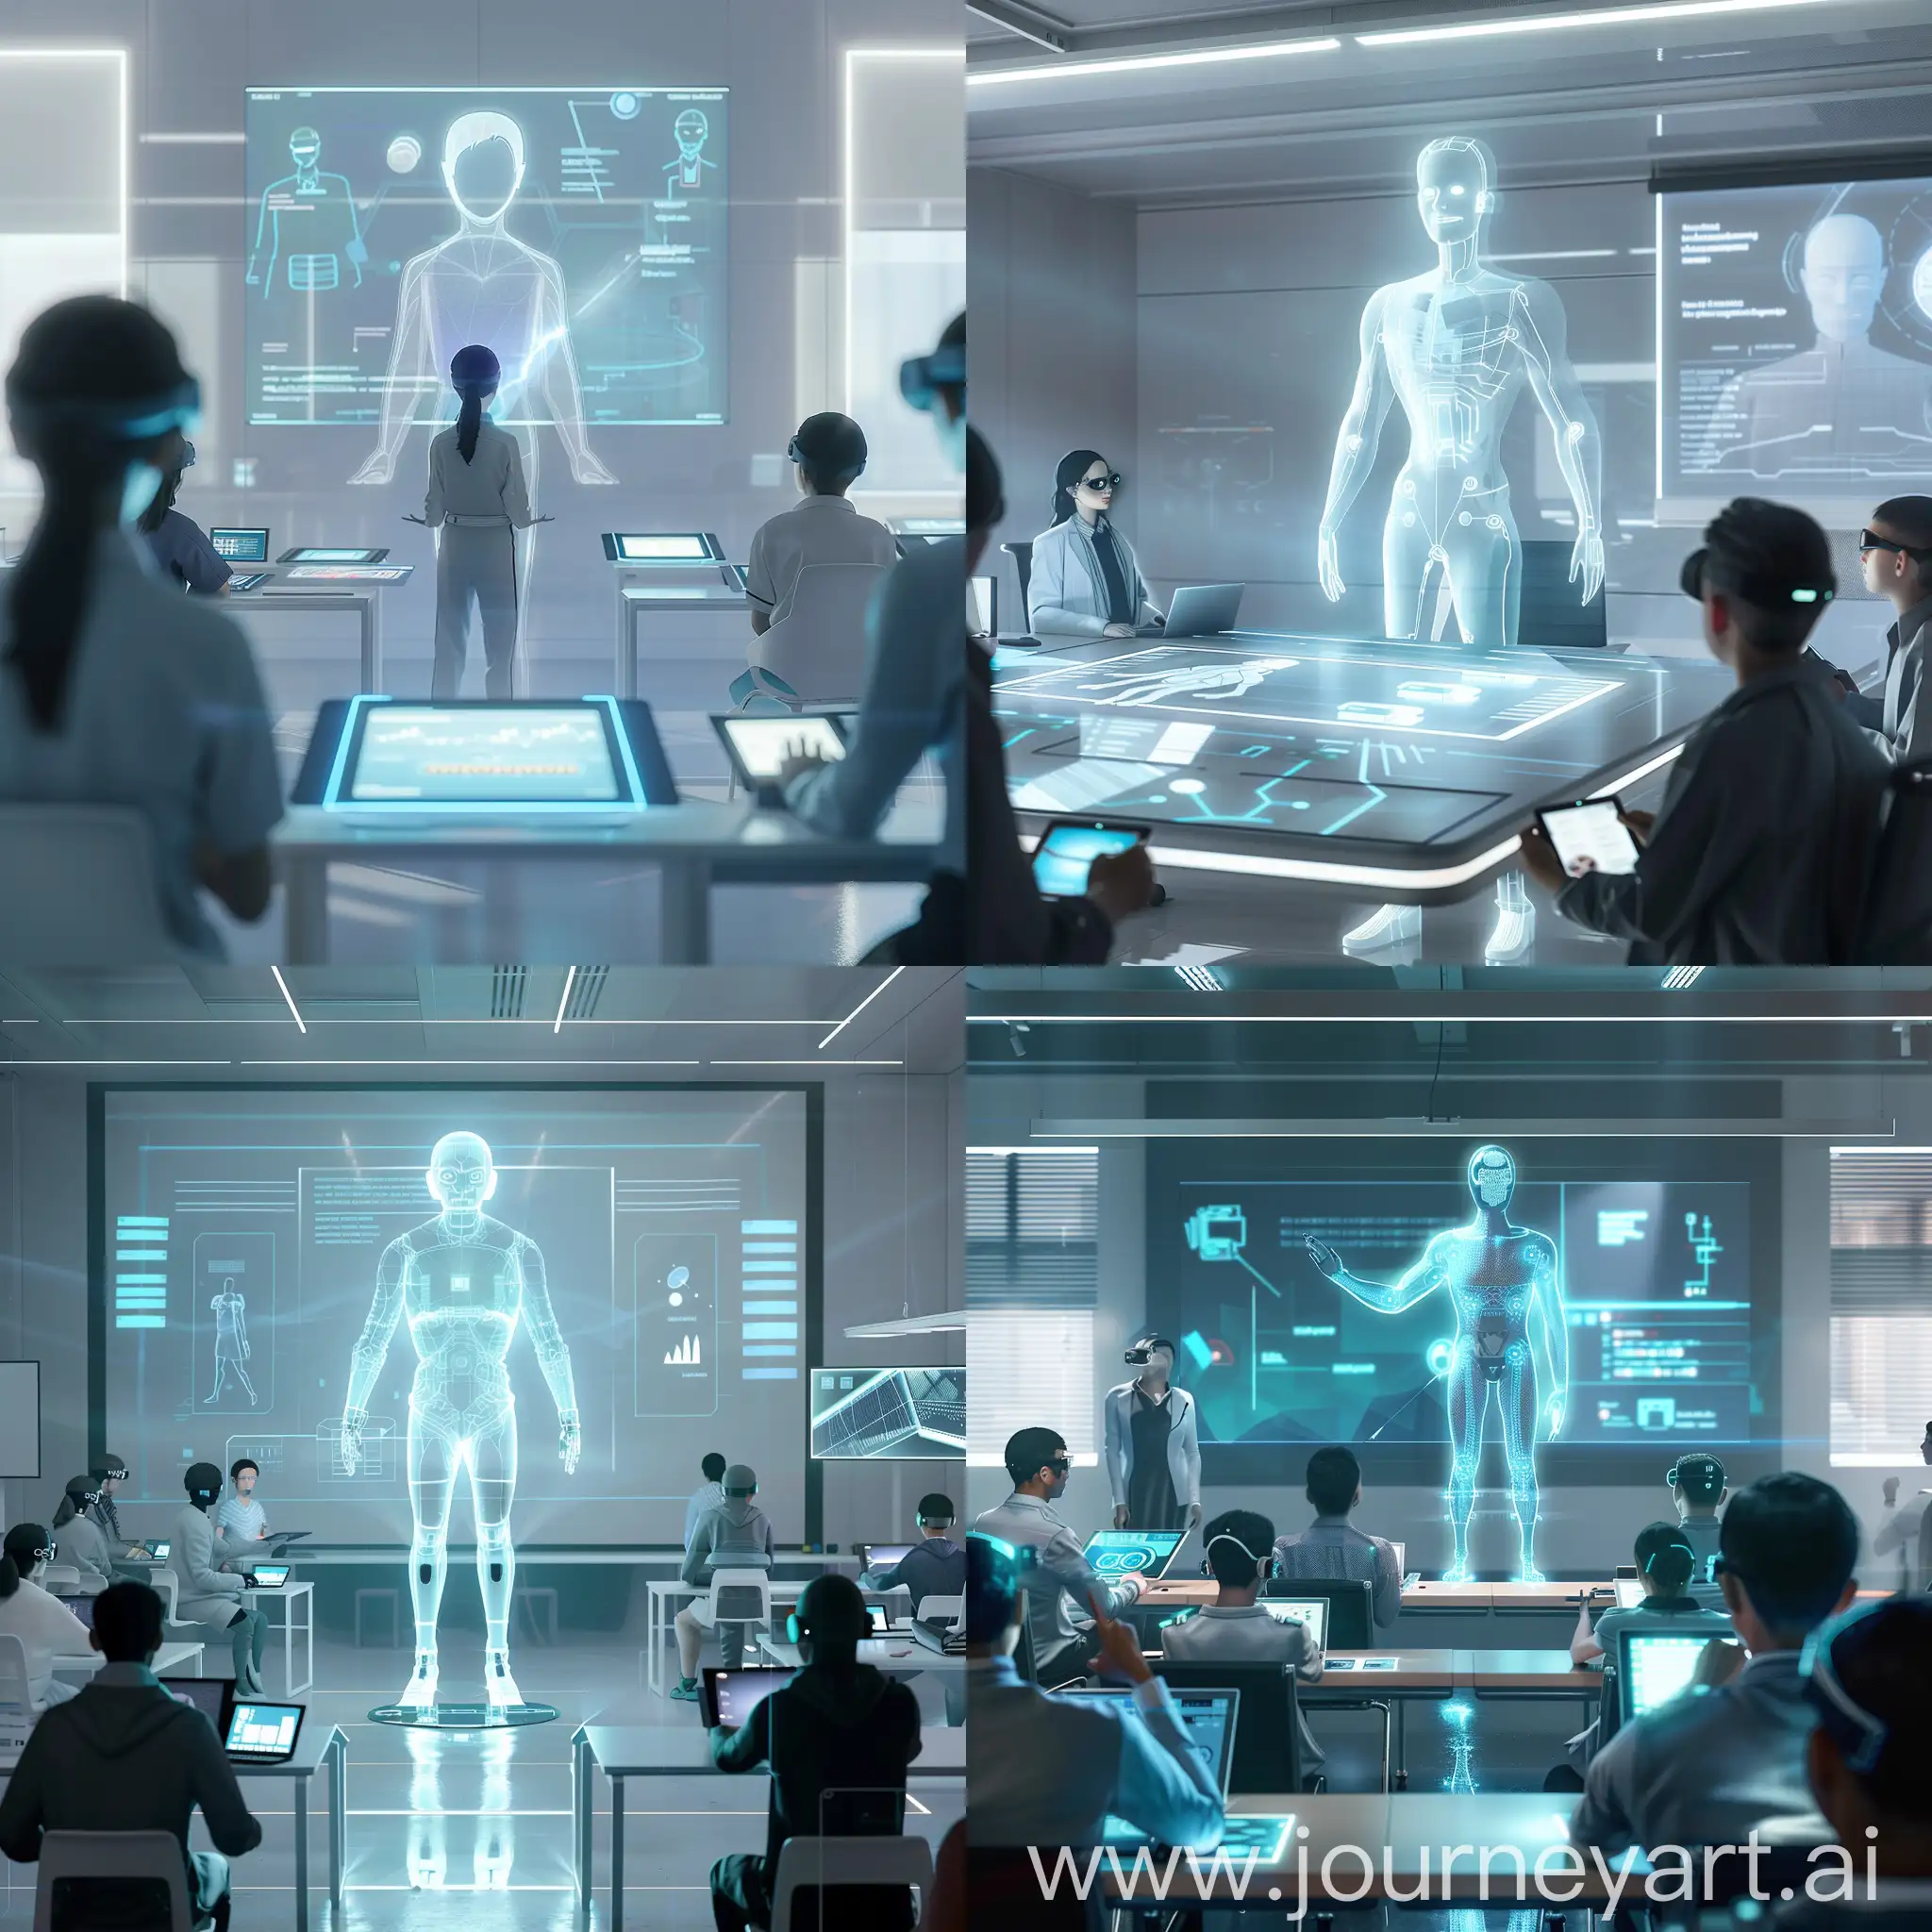 The scene is a futuristic classroom with advanced technology. The digital teacher is a sleek, holographic figure standing at the front of the room. The teacher has a friendly, approachable face and is dressed in professional, yet modern attire. The classroom is equipped with interactive smart boards, holographic displays, and students using tablets and augmented reality glasses. The environment is well-lit with a clean, minimalist design, emphasizing the seamless integration of technology into education.